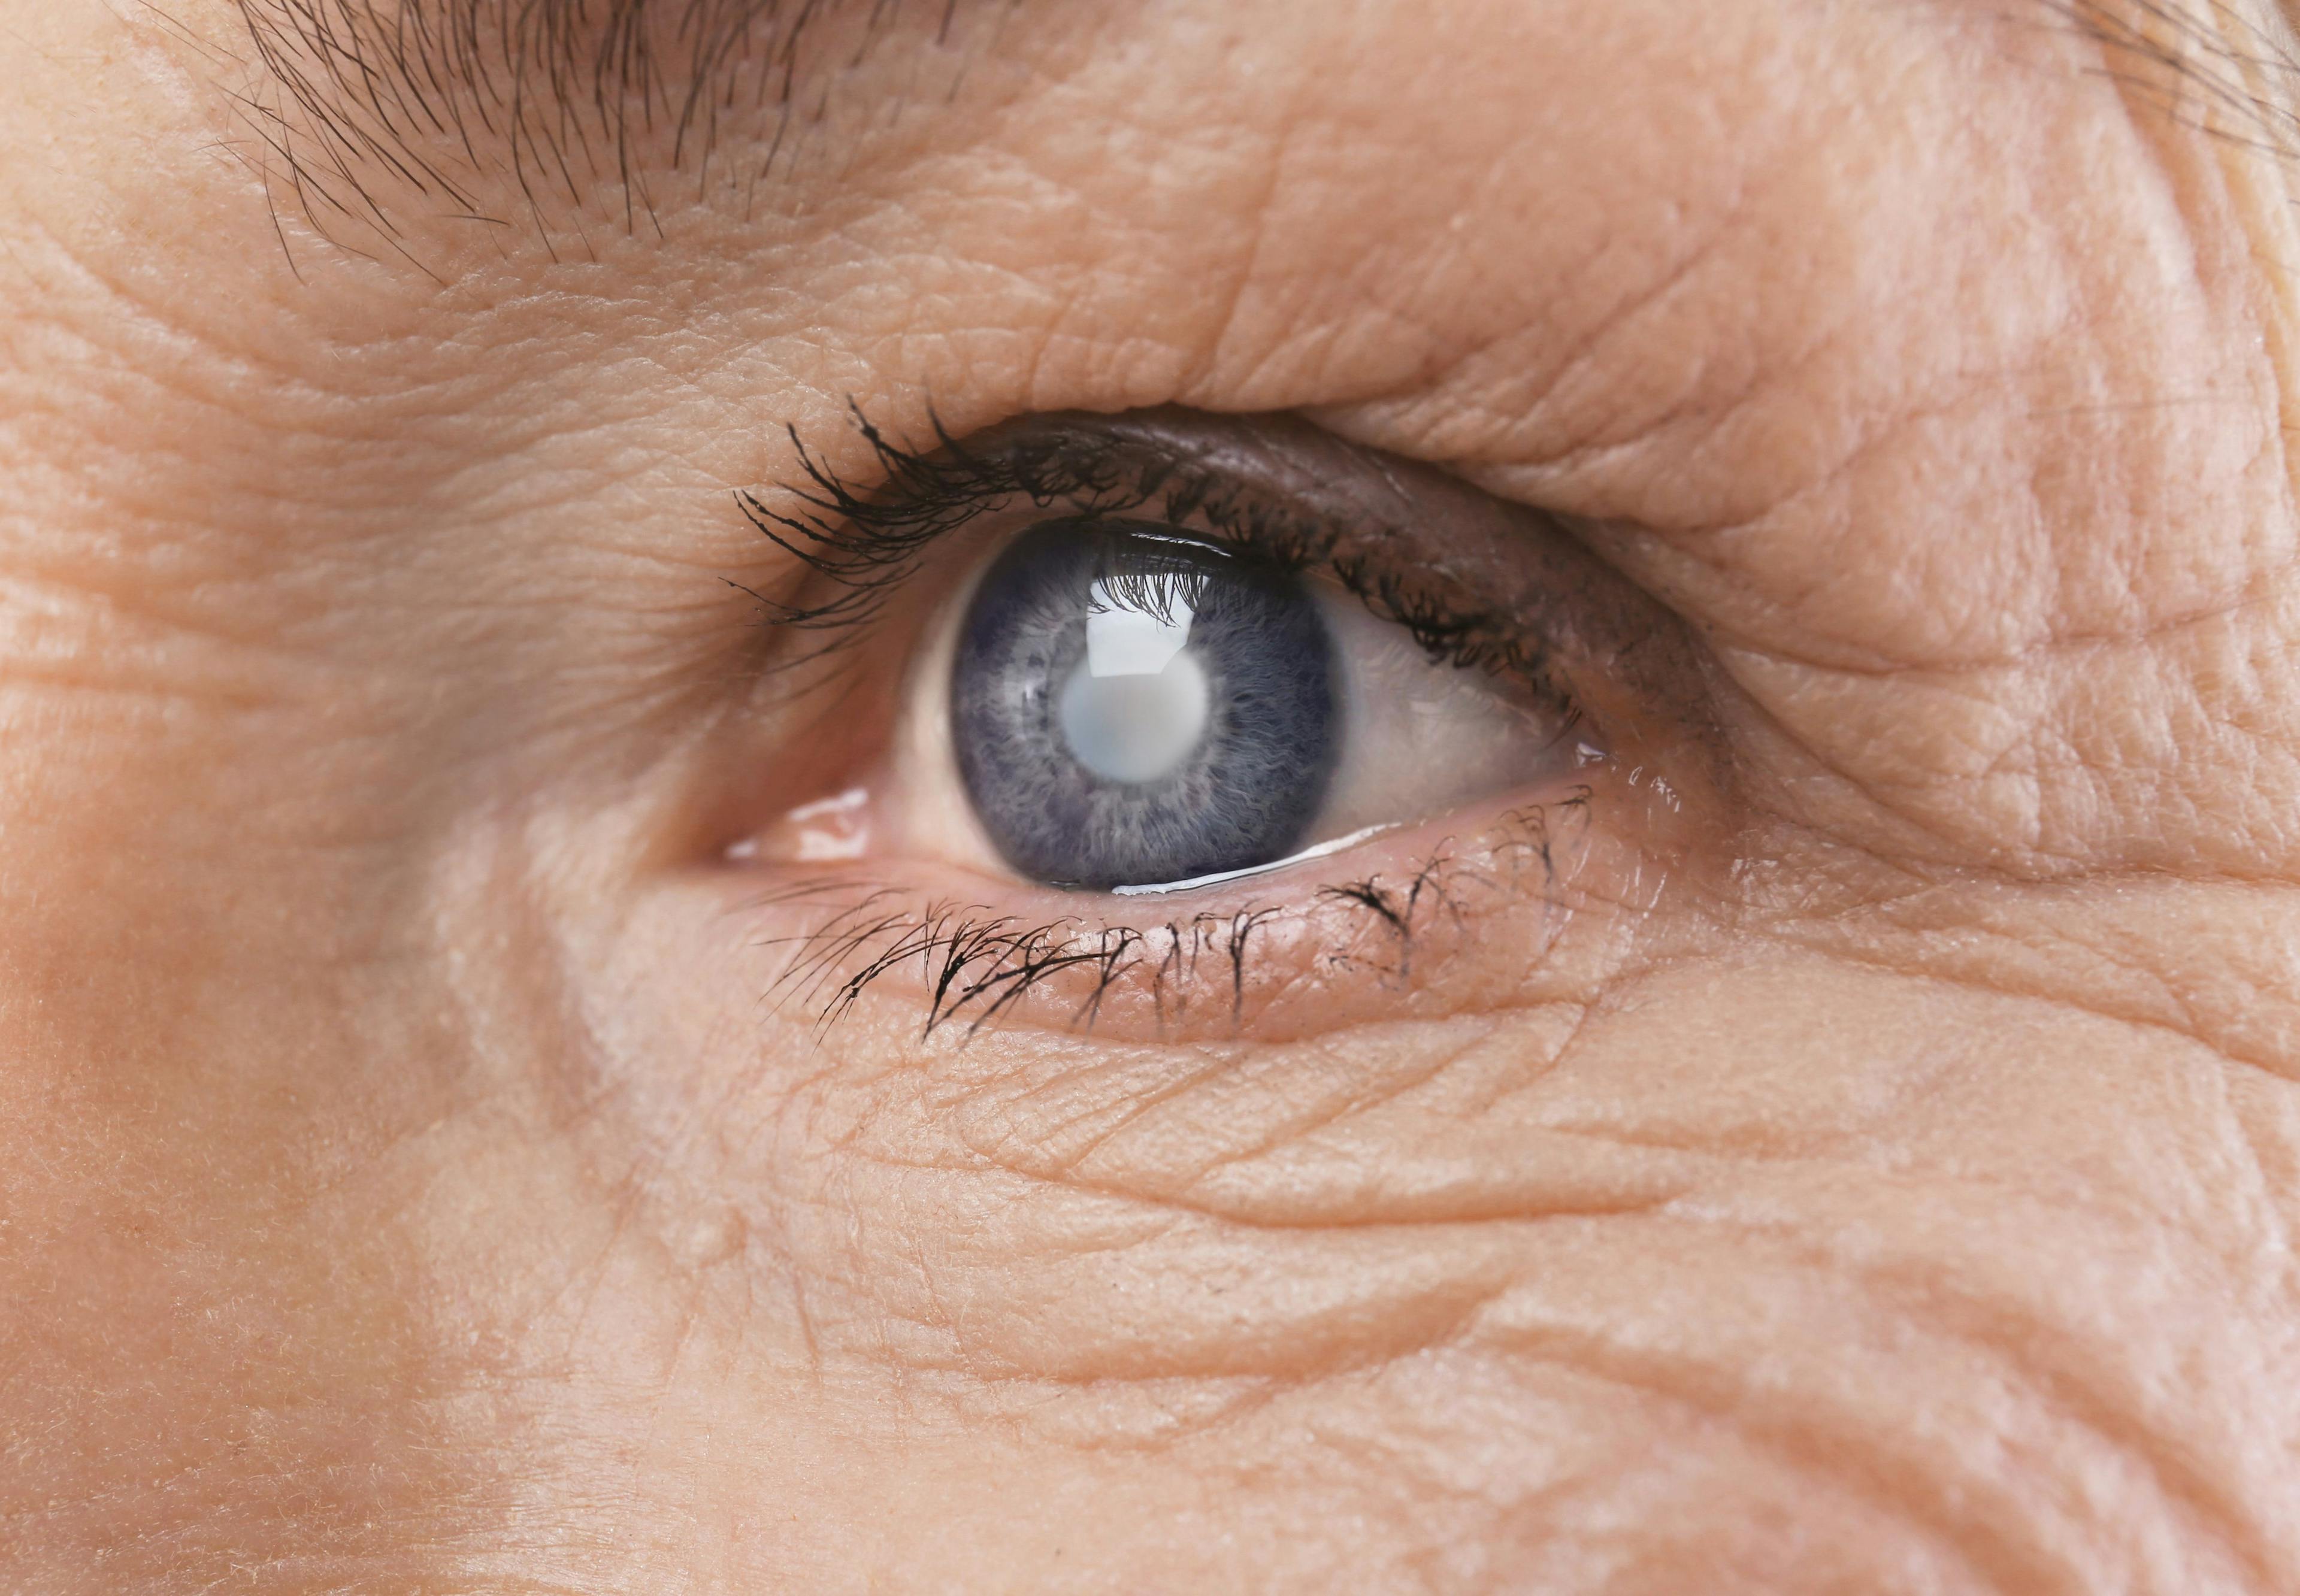 Prevalence of Glaucoma, POAG Associated With Age, Race in California Medicare Beneficiaries